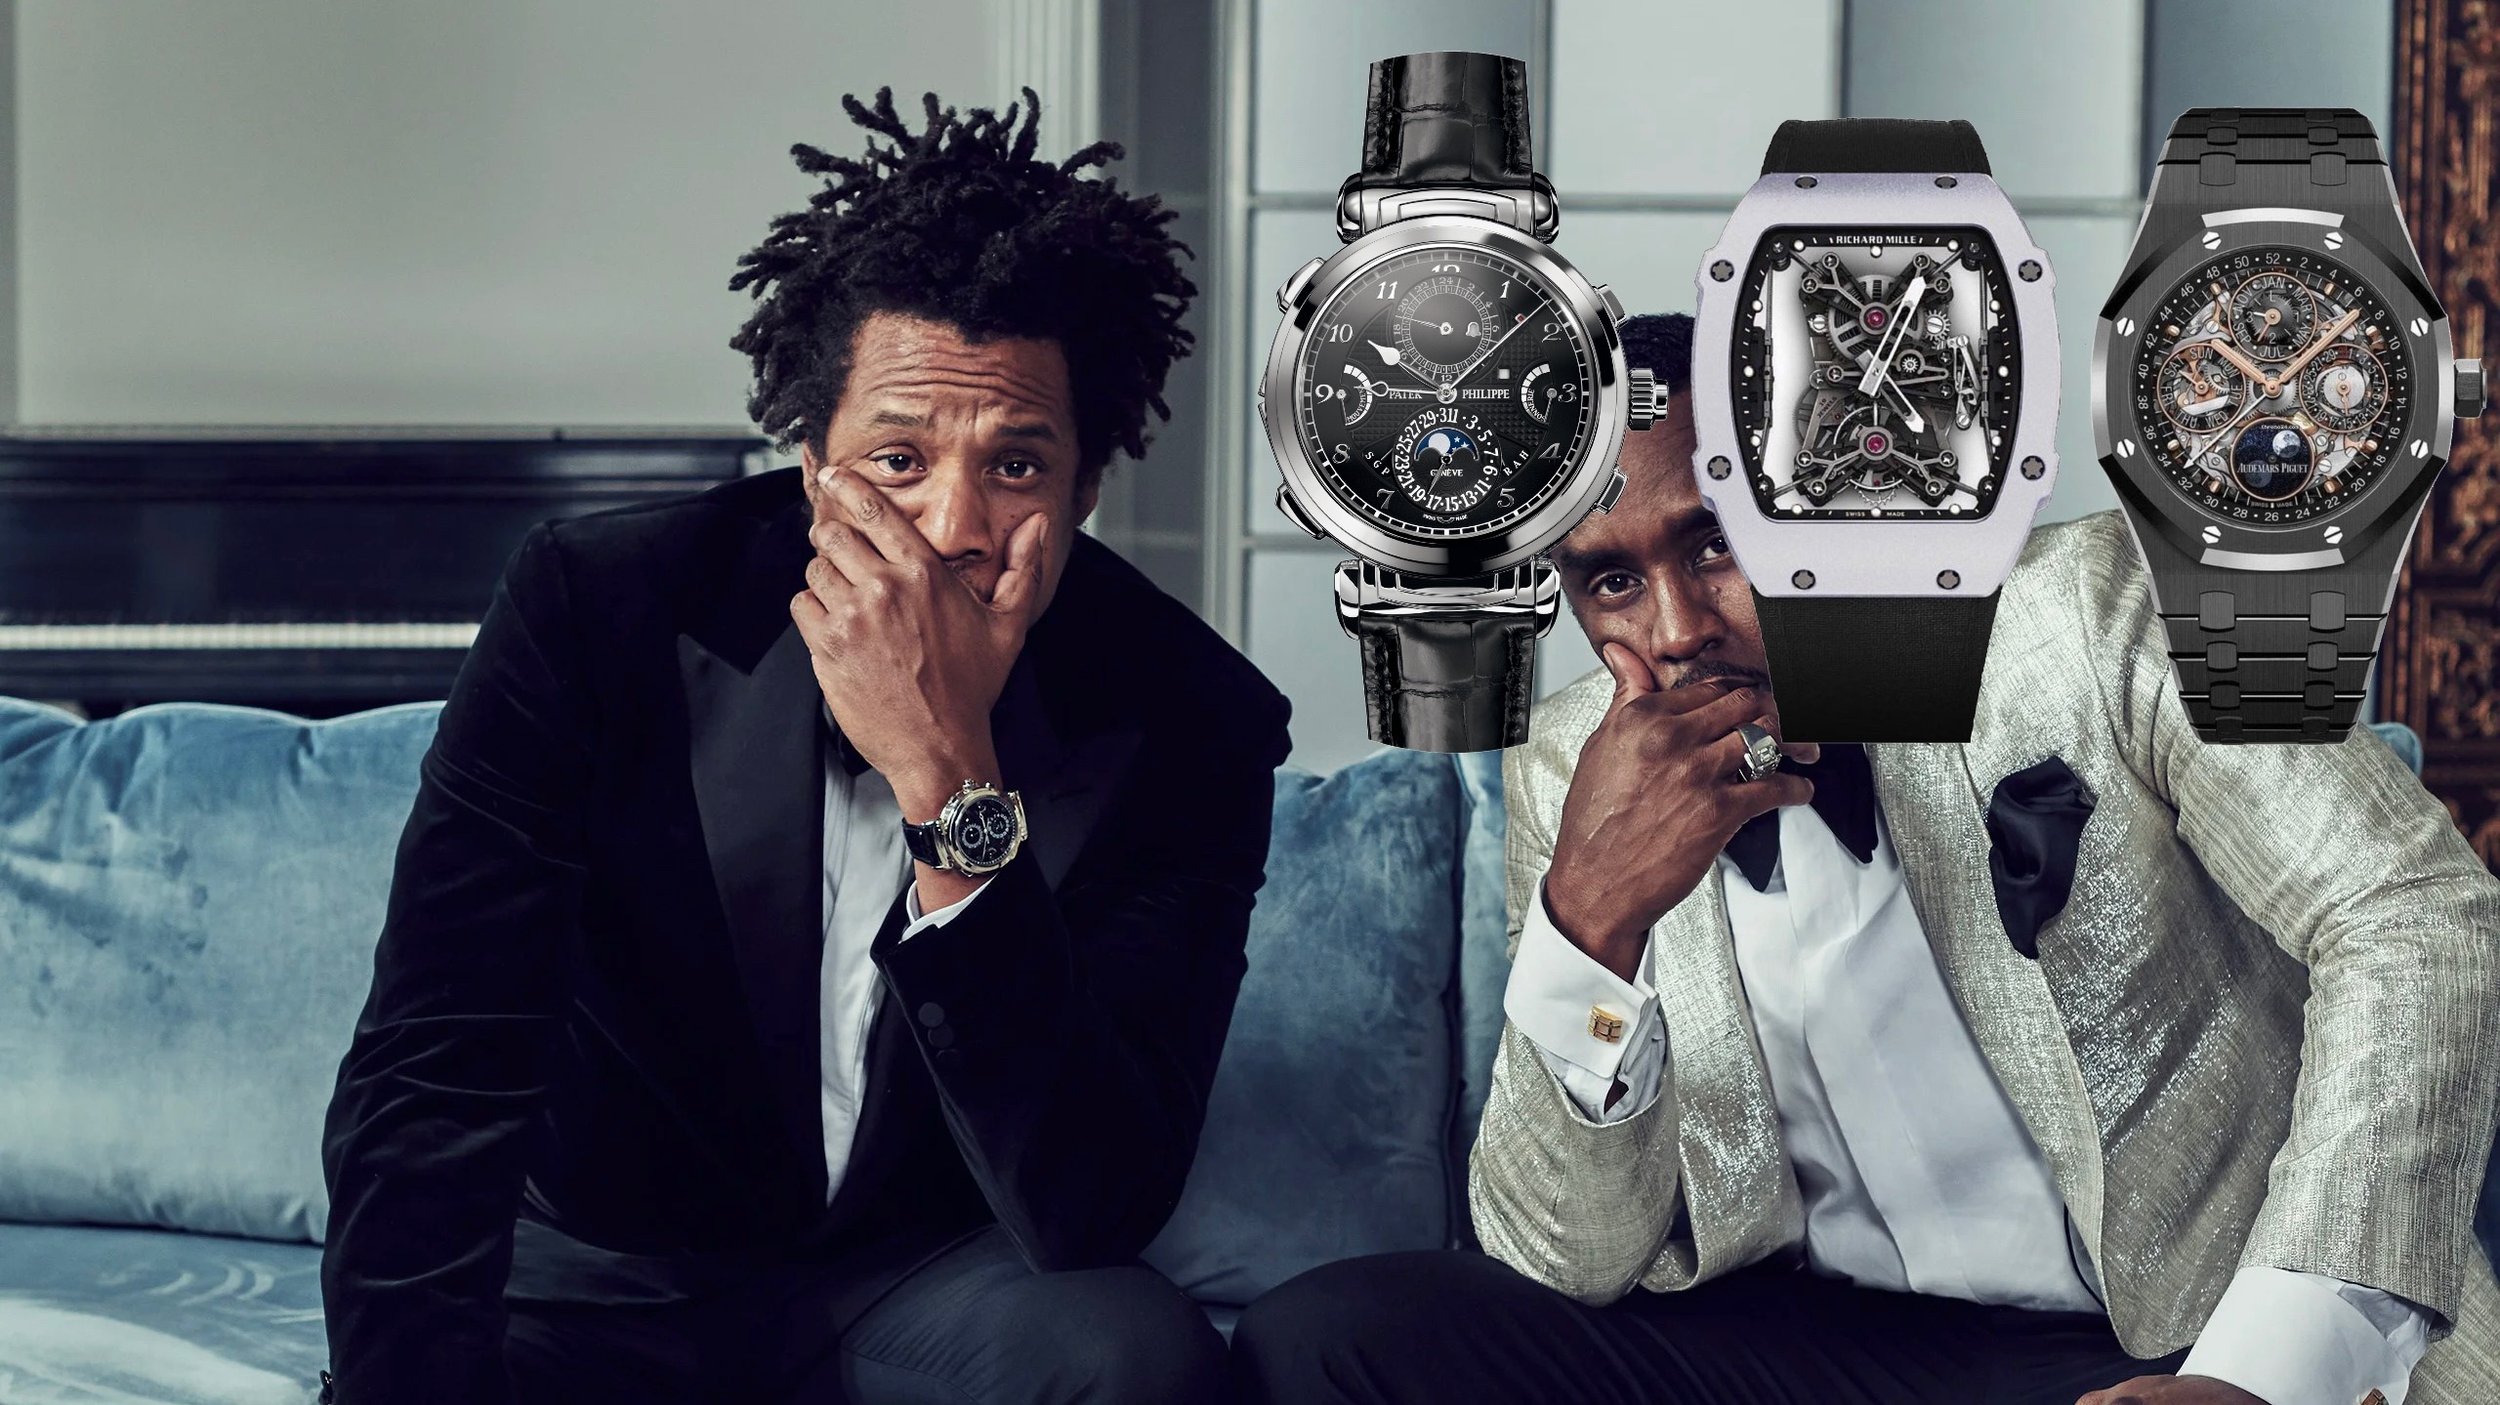 JAY-Z's Jacob & Co. Watch Sold for $1.5 Million USD at Auction